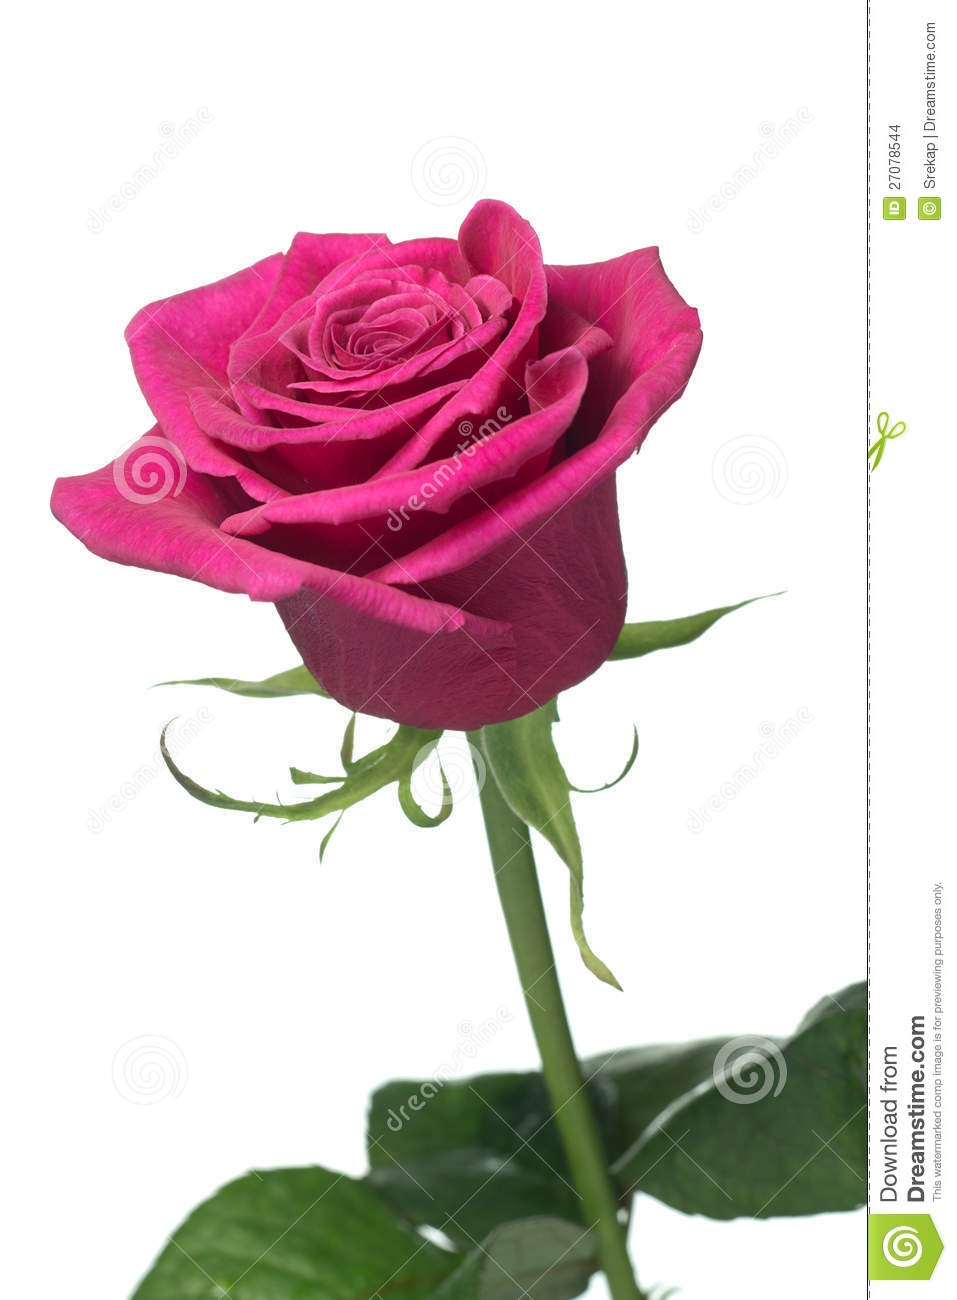 Beautiful Cerise Pink Rose With Focus On The Centre Of The Rose